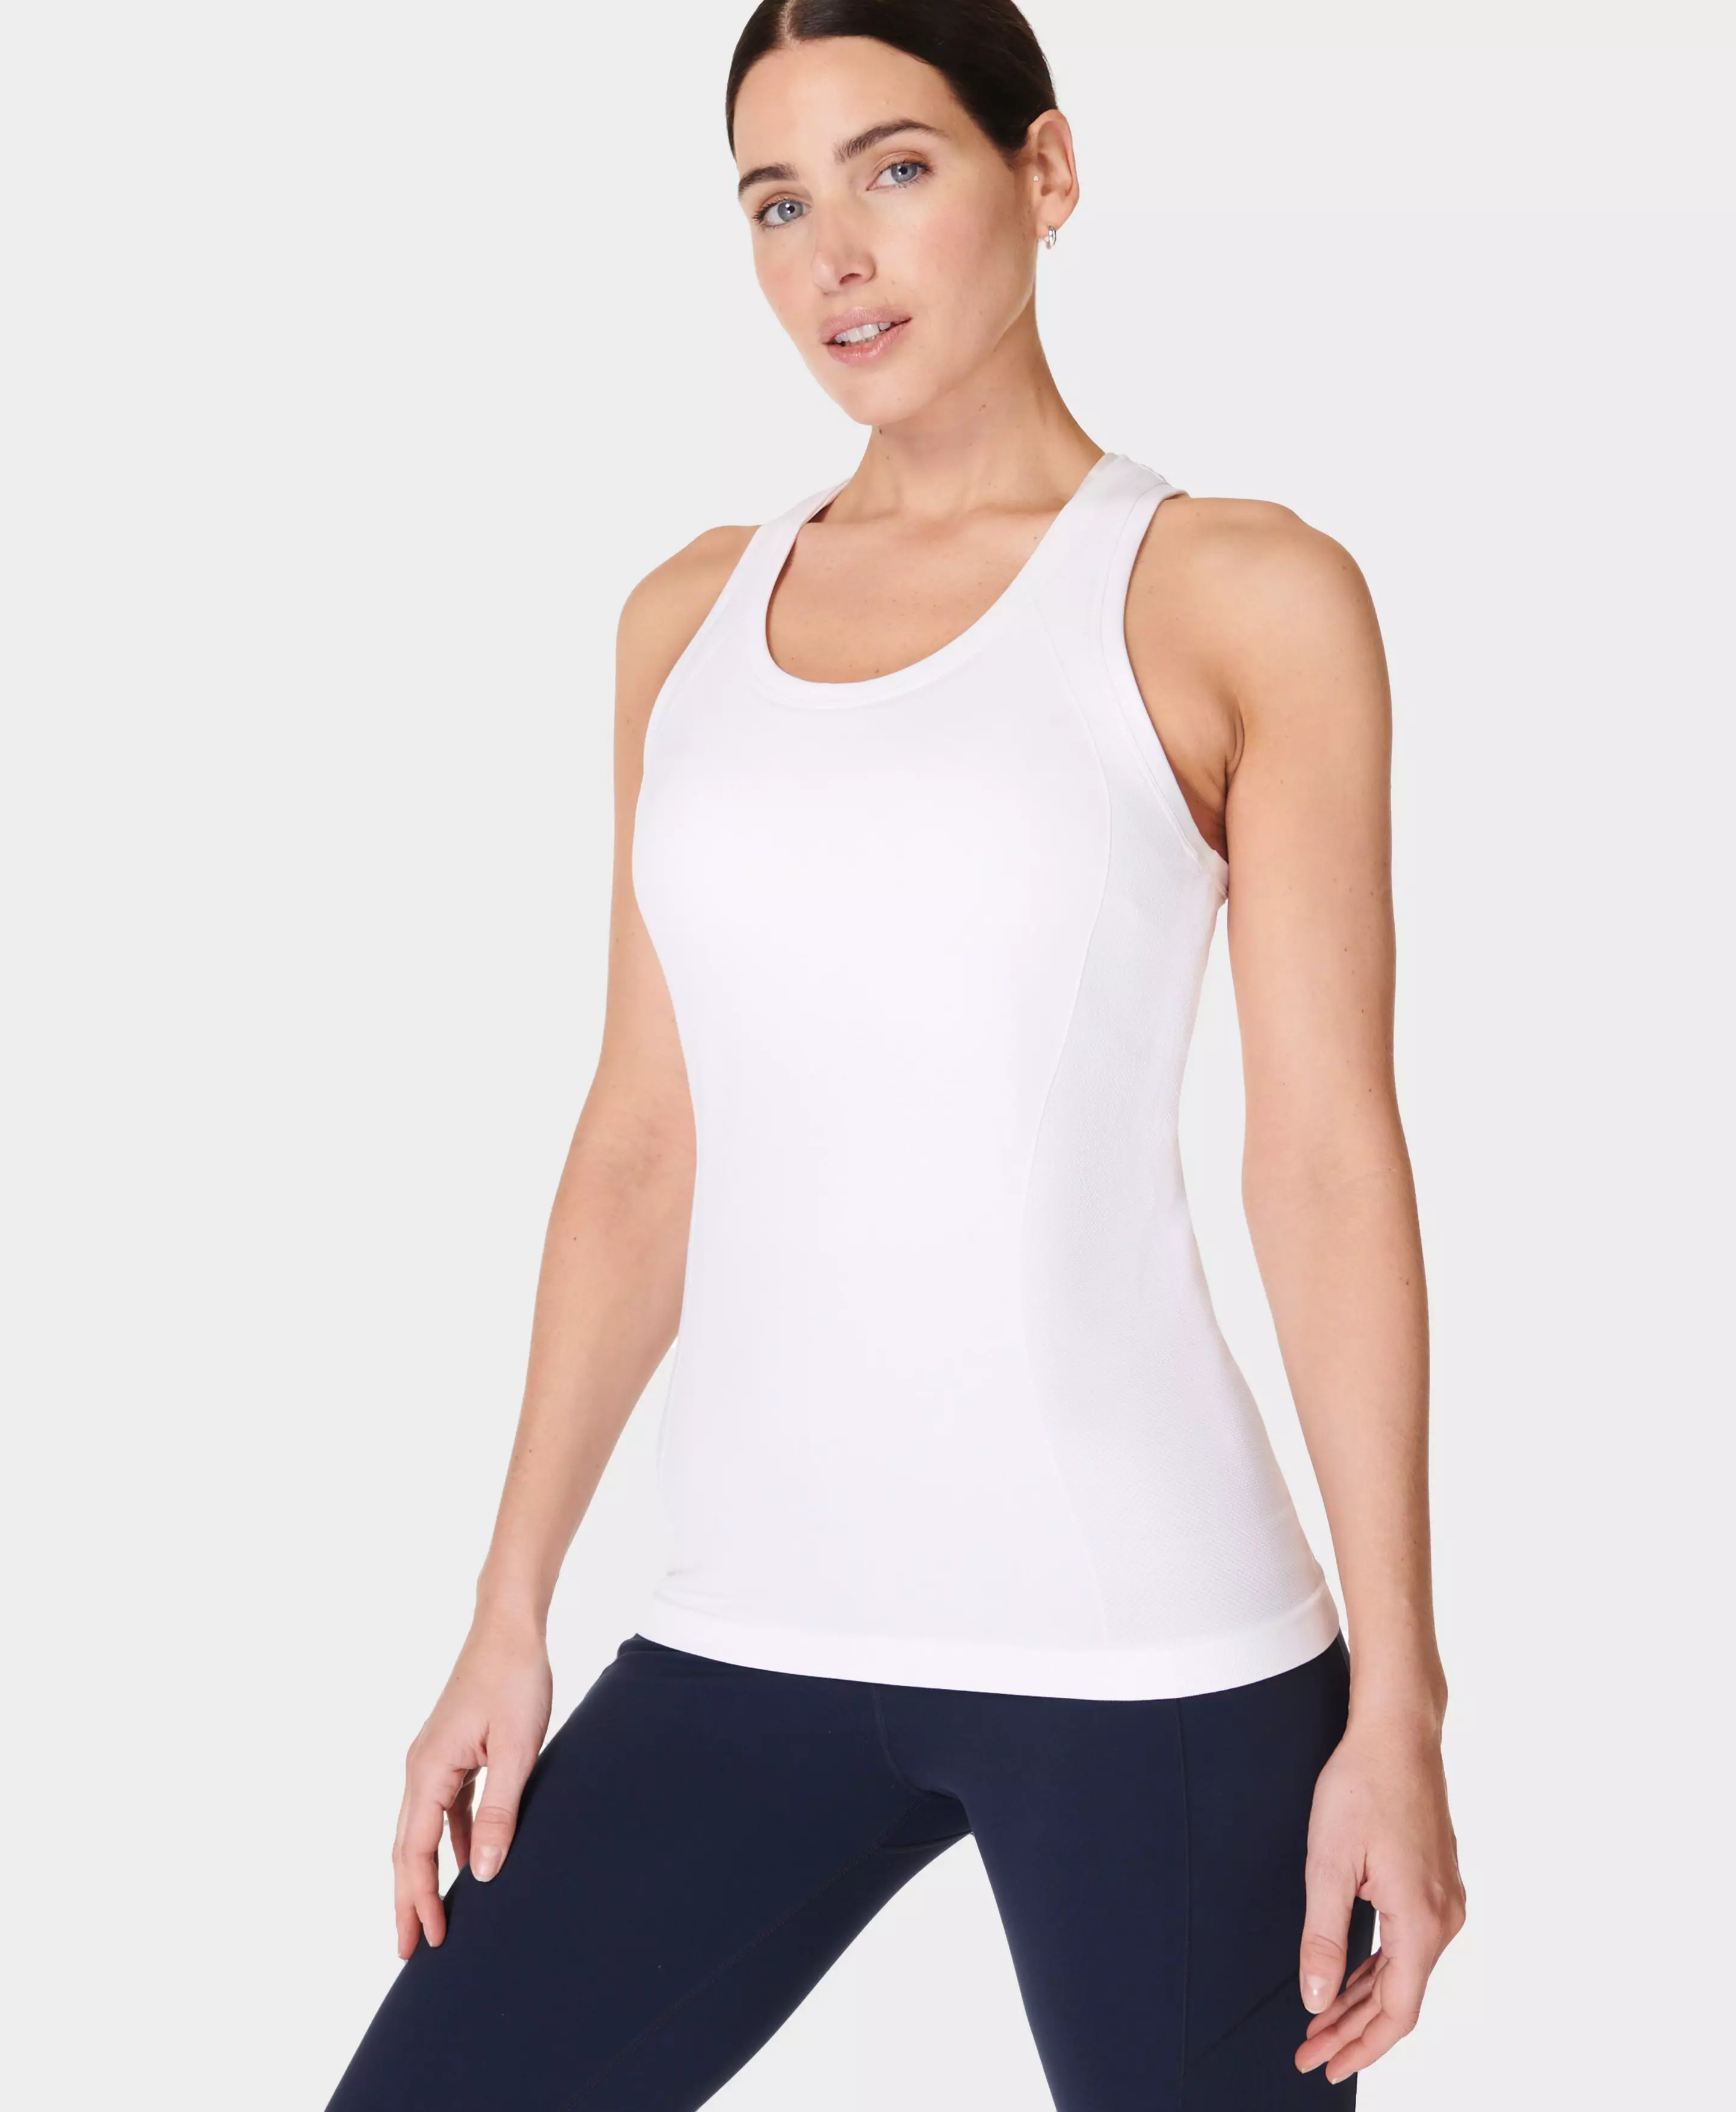 Over instelling ketting Continent Athlete Seamless Workout Tank - white | Women's Tanks | www.sweatybetty.com